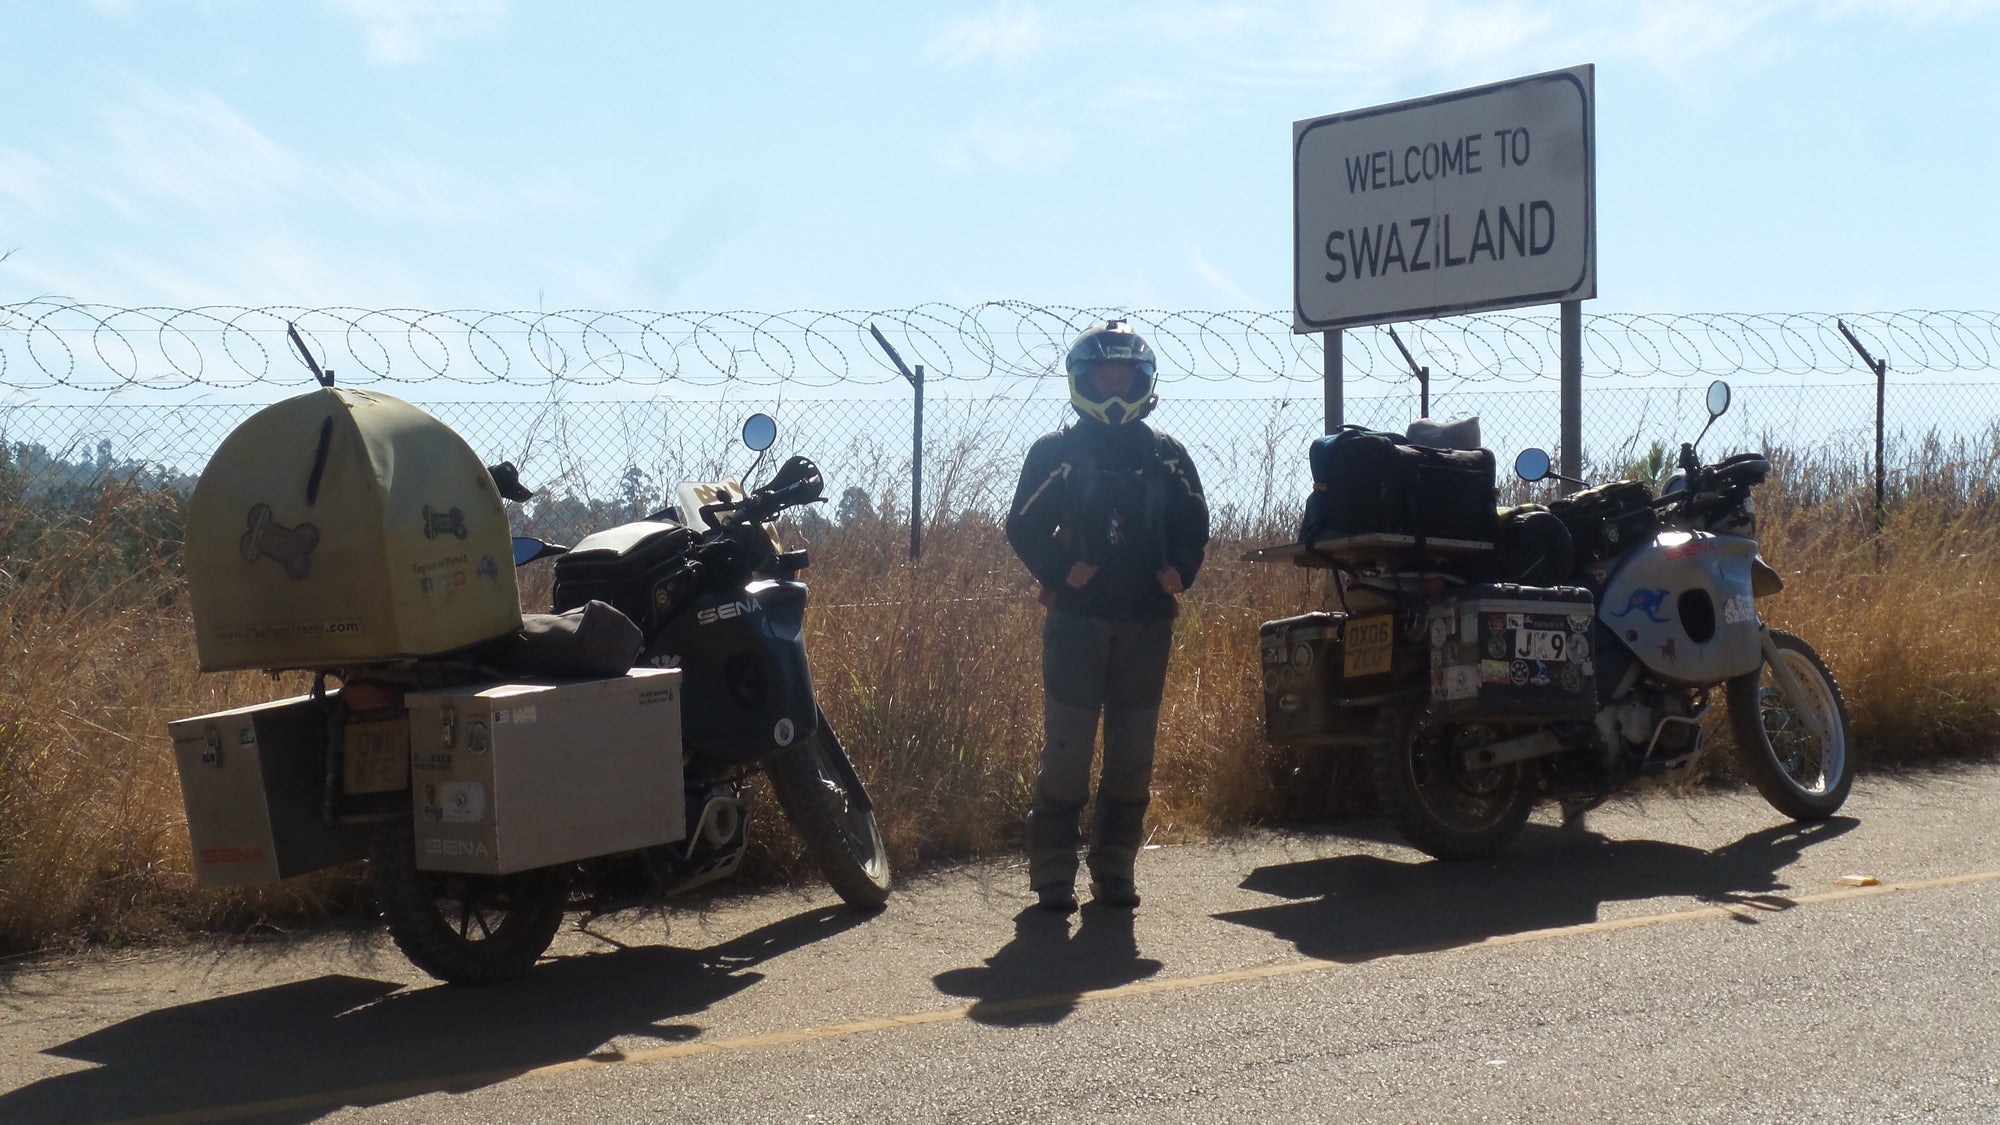 The Pack Track rode from South Africa in to Swaziland, a very small but beautiful African country.